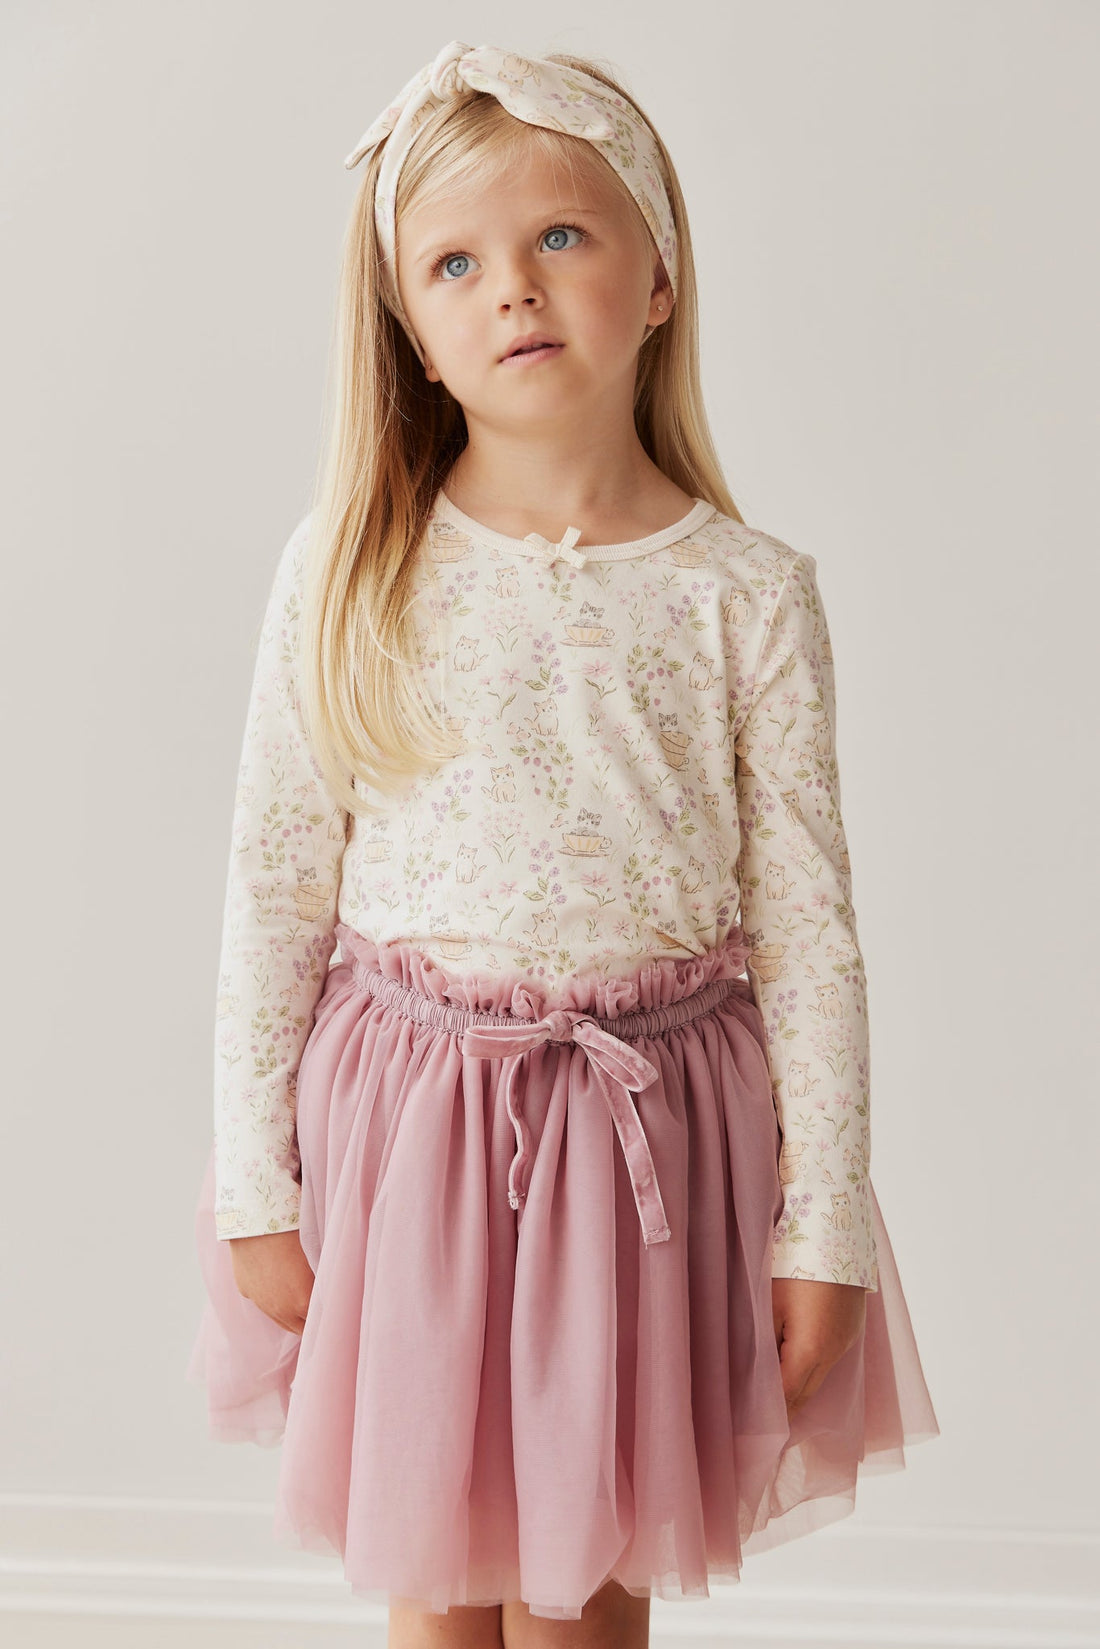 Organic Cotton Long Sleeve Top - Moons Garden Childrens Top from Jamie Kay USA